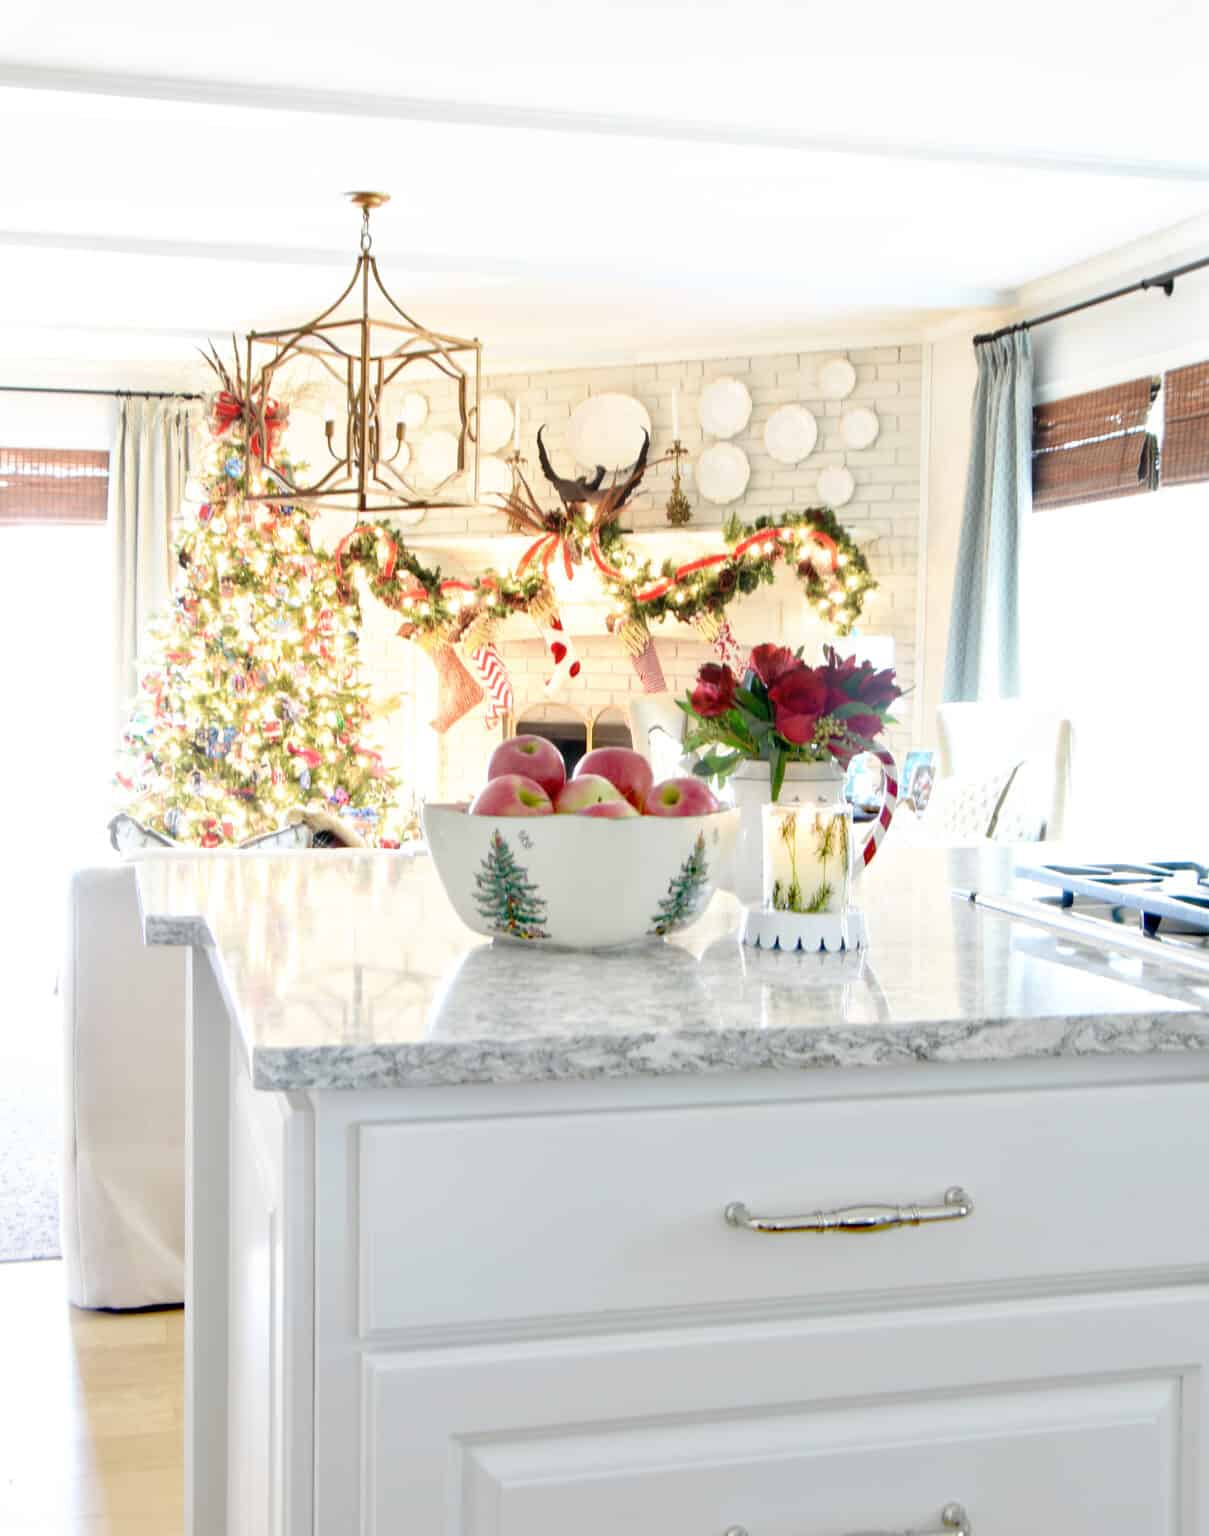 Holiday Home Tour 2019 {Kitchen, Mudroom & Powder Room} – Dixie Delights